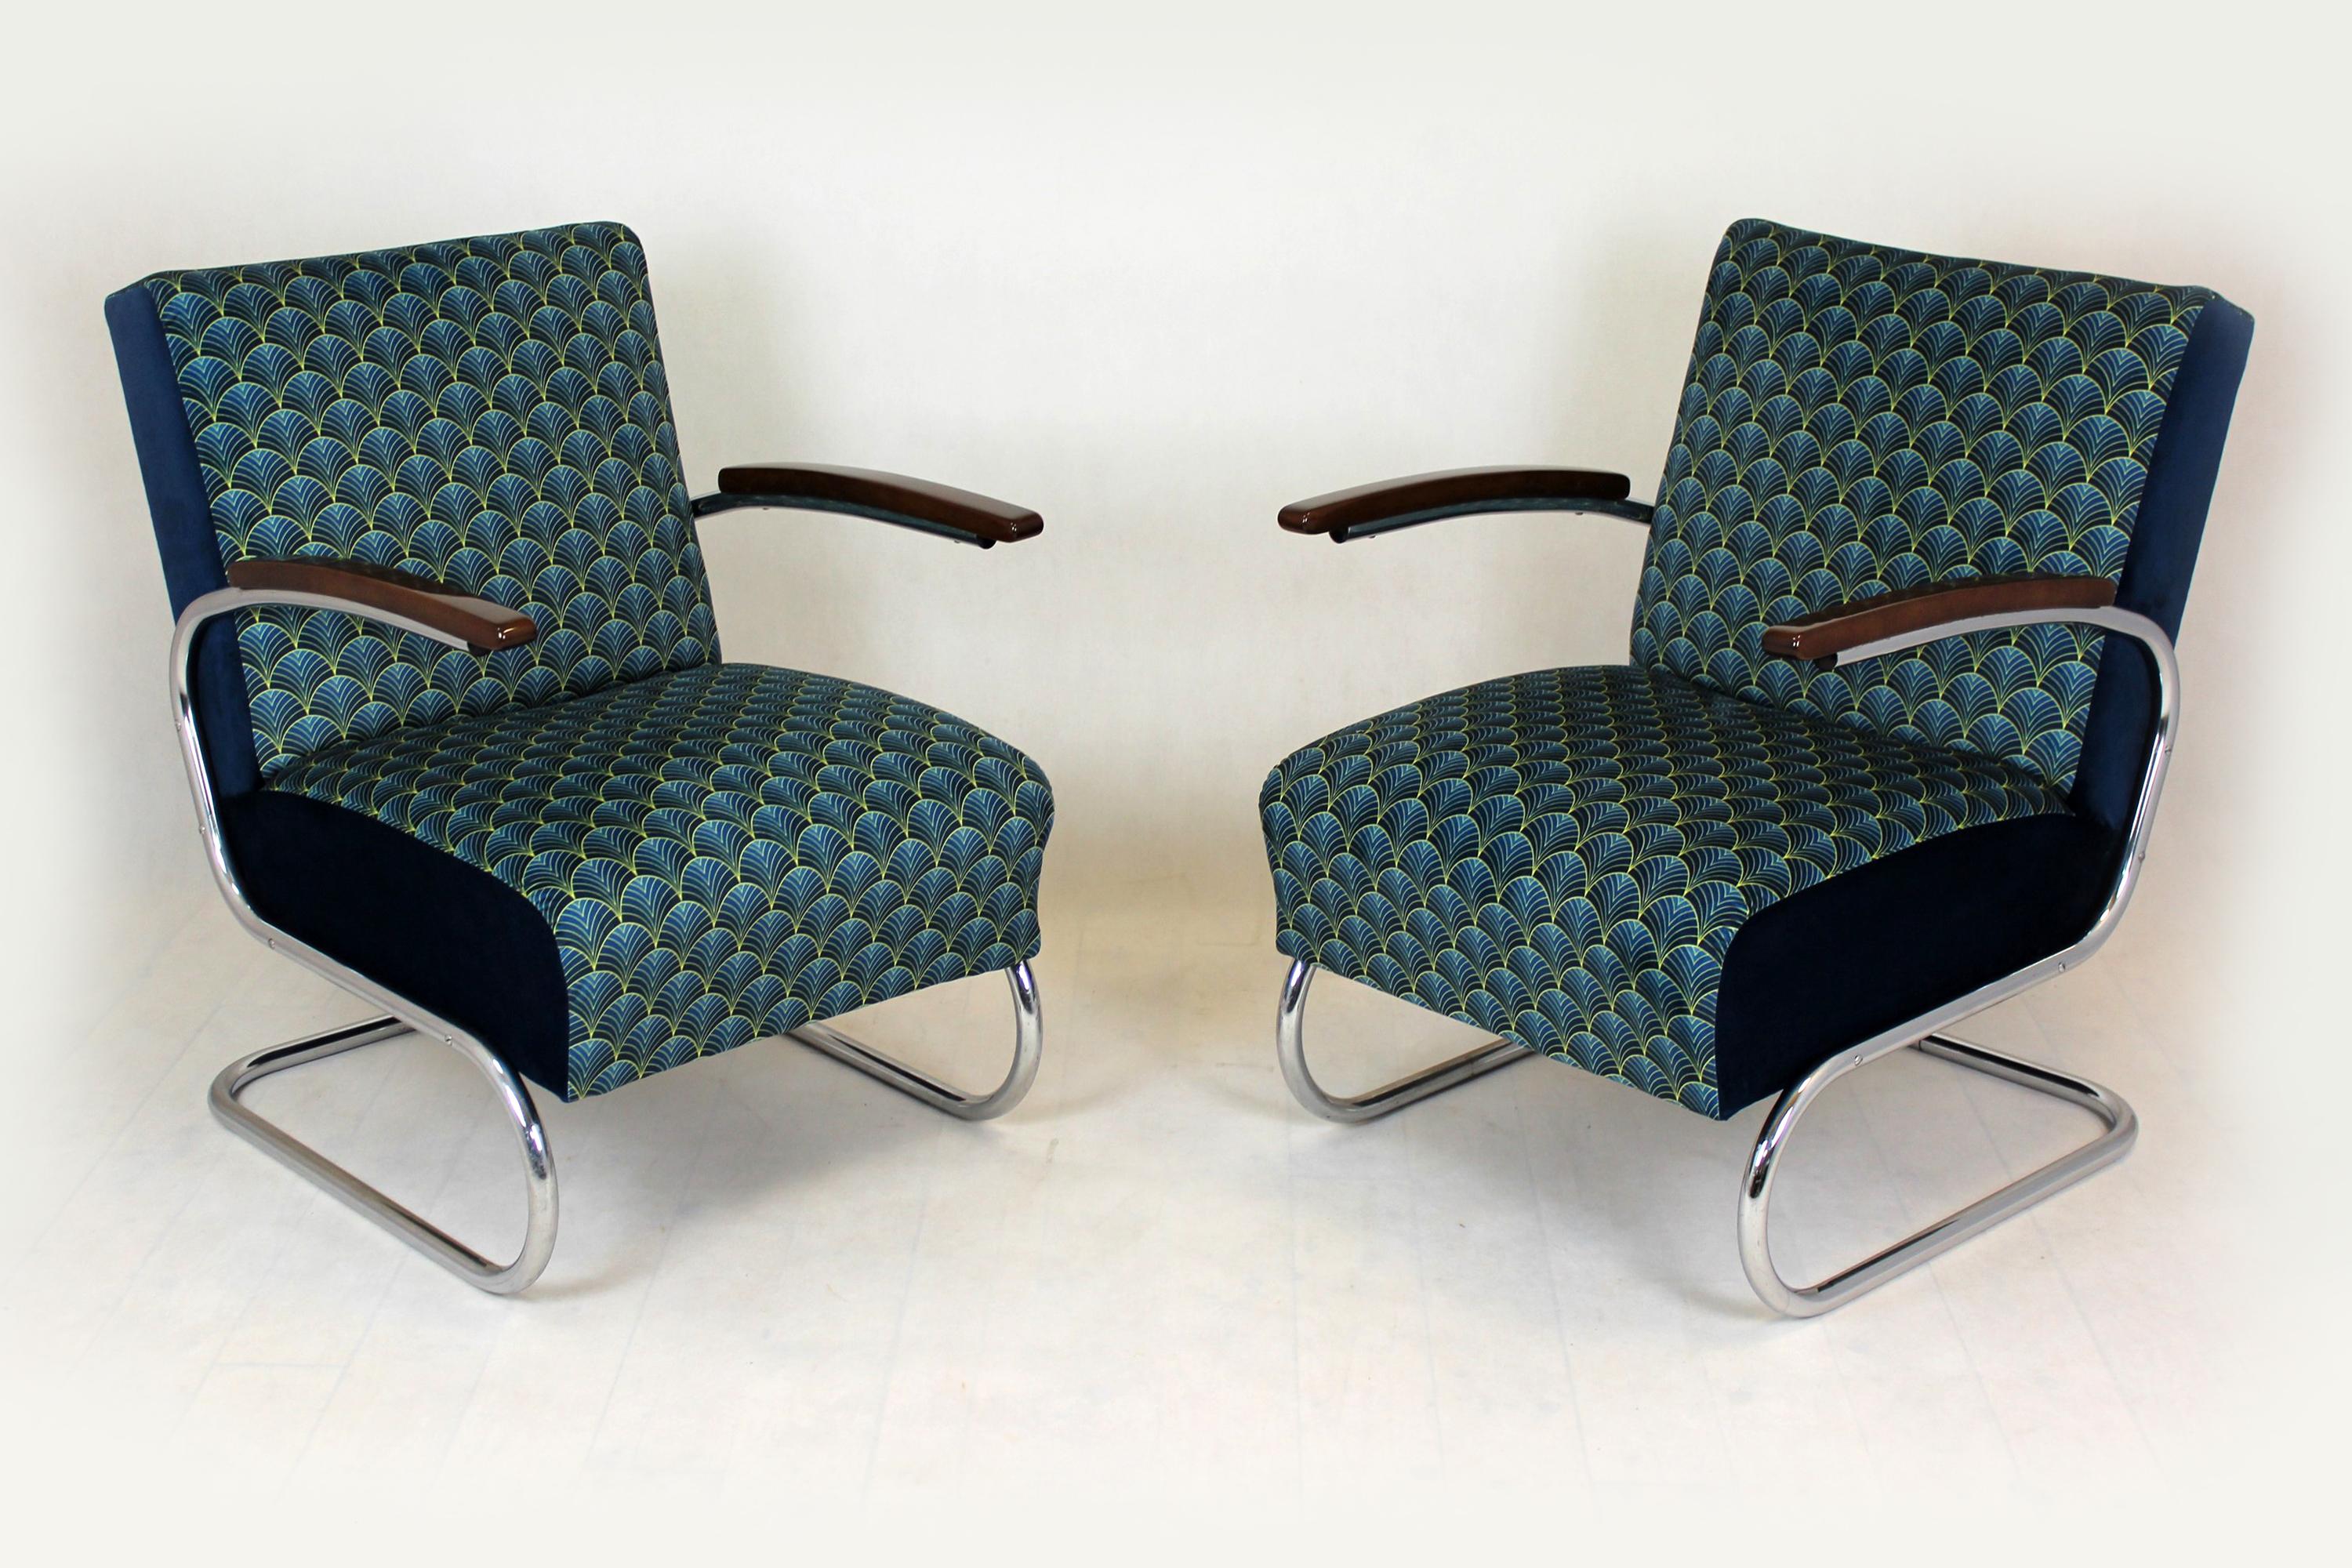 – Set of two Bauhaus style cantilever armchairs with a lacquered wood and chrome tubular steel frames
– Designed in the 1930s by Willem Hendrik Gispen
– Manufactured by Mücke Melder under Thonet license
– The woodwork has been completely